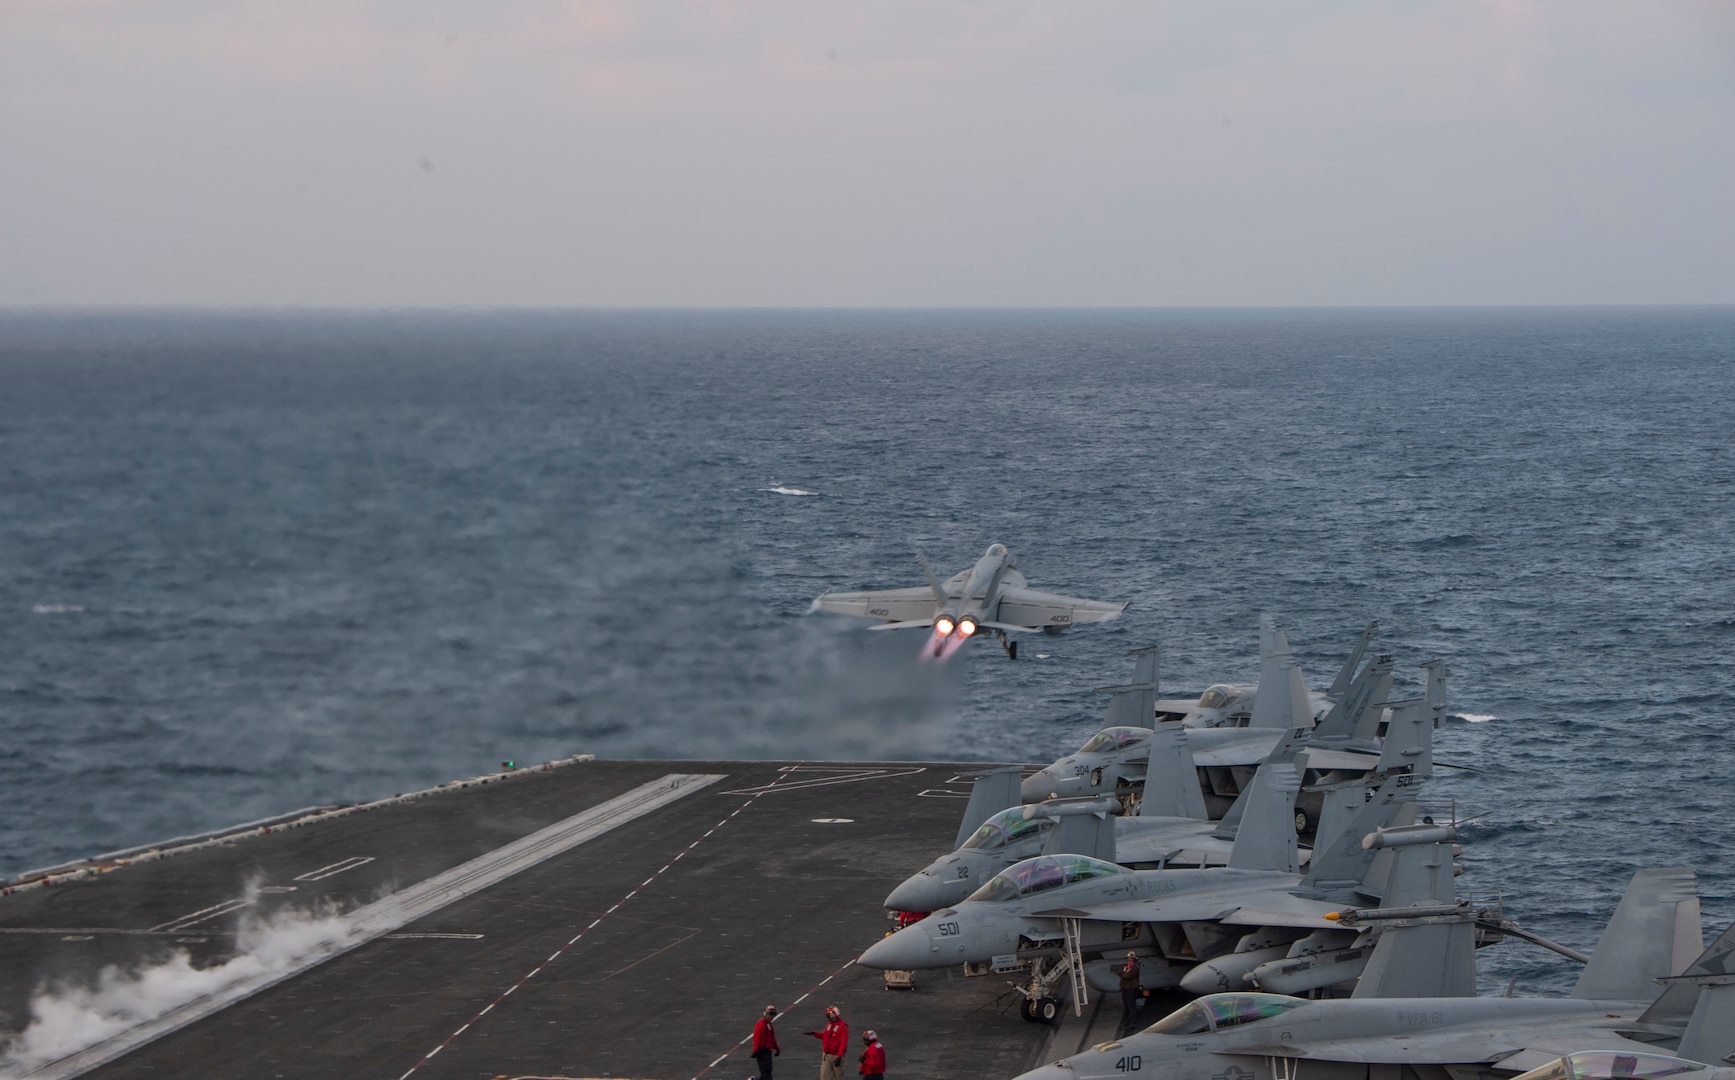 An F/A-18E Super Hornet, attached to the “Sunliners” of Strike Fighter Squadron (VFA) 81, takes off from the flight deck of the aircraft carrier USS Harry S. Truman (CVN 75) in the Arabian Sea, Dec. 20, 2019. The Harry S. Truman Carrier Strike Group is deployed to the U.S. 5th Fleet area of operations in support of naval operations to ensure maritime stability and security in the Central Region, connecting the Mediterranean and the Pacific through the western Indian Ocean and three strategic choke points. (U.S. Navy photo by Mass Communication Specialist 2nd Class Jake Carrillo)